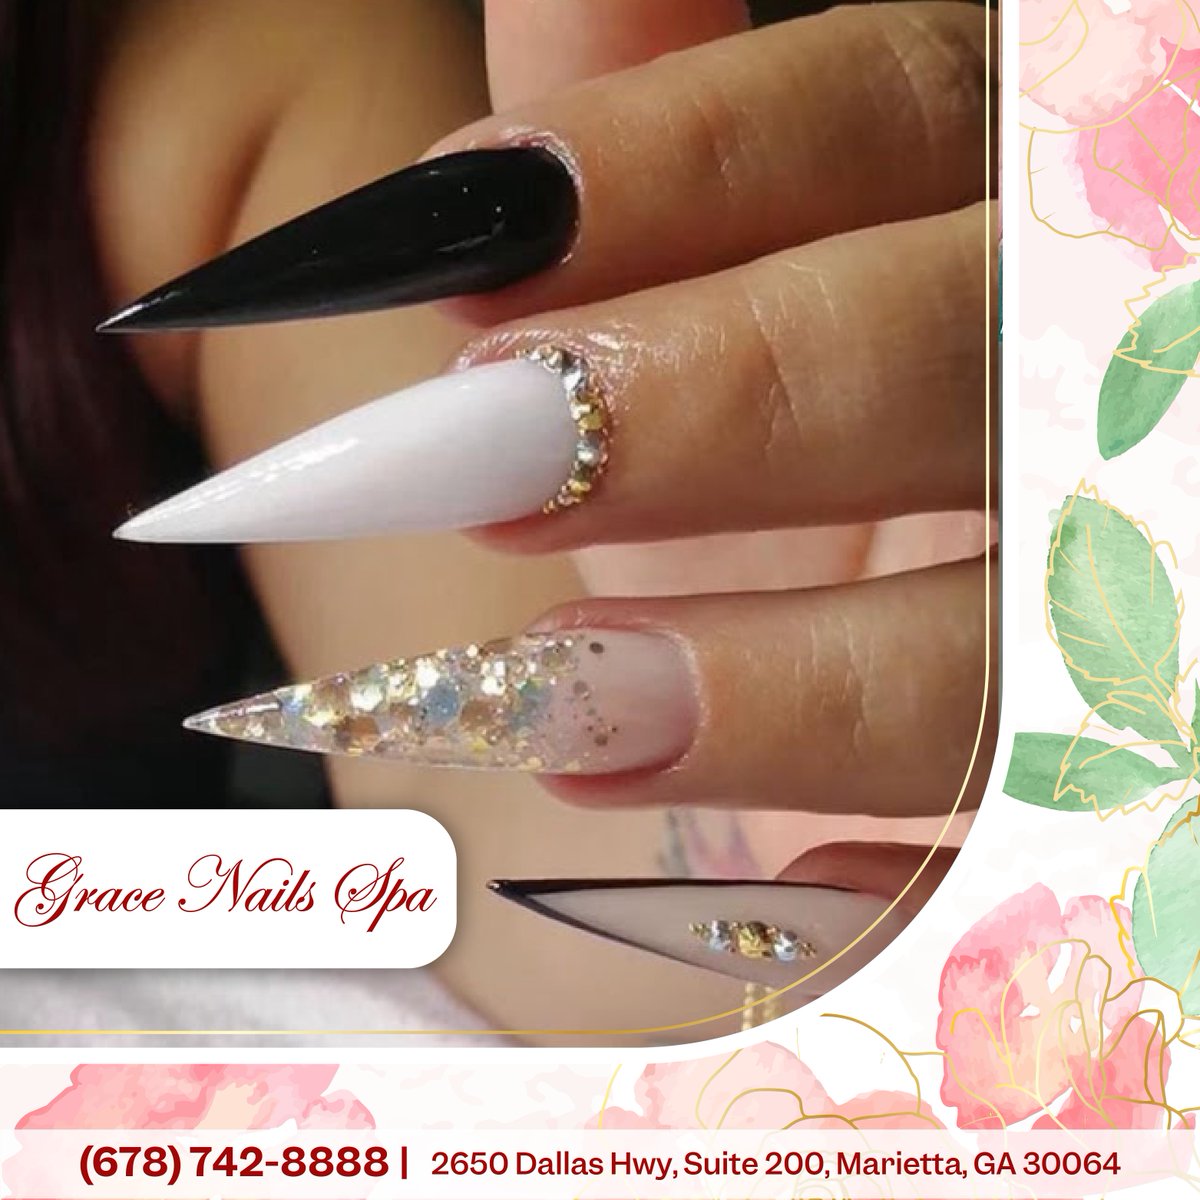 Reach for the stars with these ultra-long stiletto nails! 🖤✨
𝐁𝐨𝐨𝐤 𝐍𝐨𝐰: lk.macmarketing.us/gracenails-boo…
#GraceNailsSpa #GraceNailsSpaMarietta #Mariettanailsalon #nailsmagazine #nailswag #nailstyle #gelnails #nailsonfleek #nails2inspire #nailsofinstagram